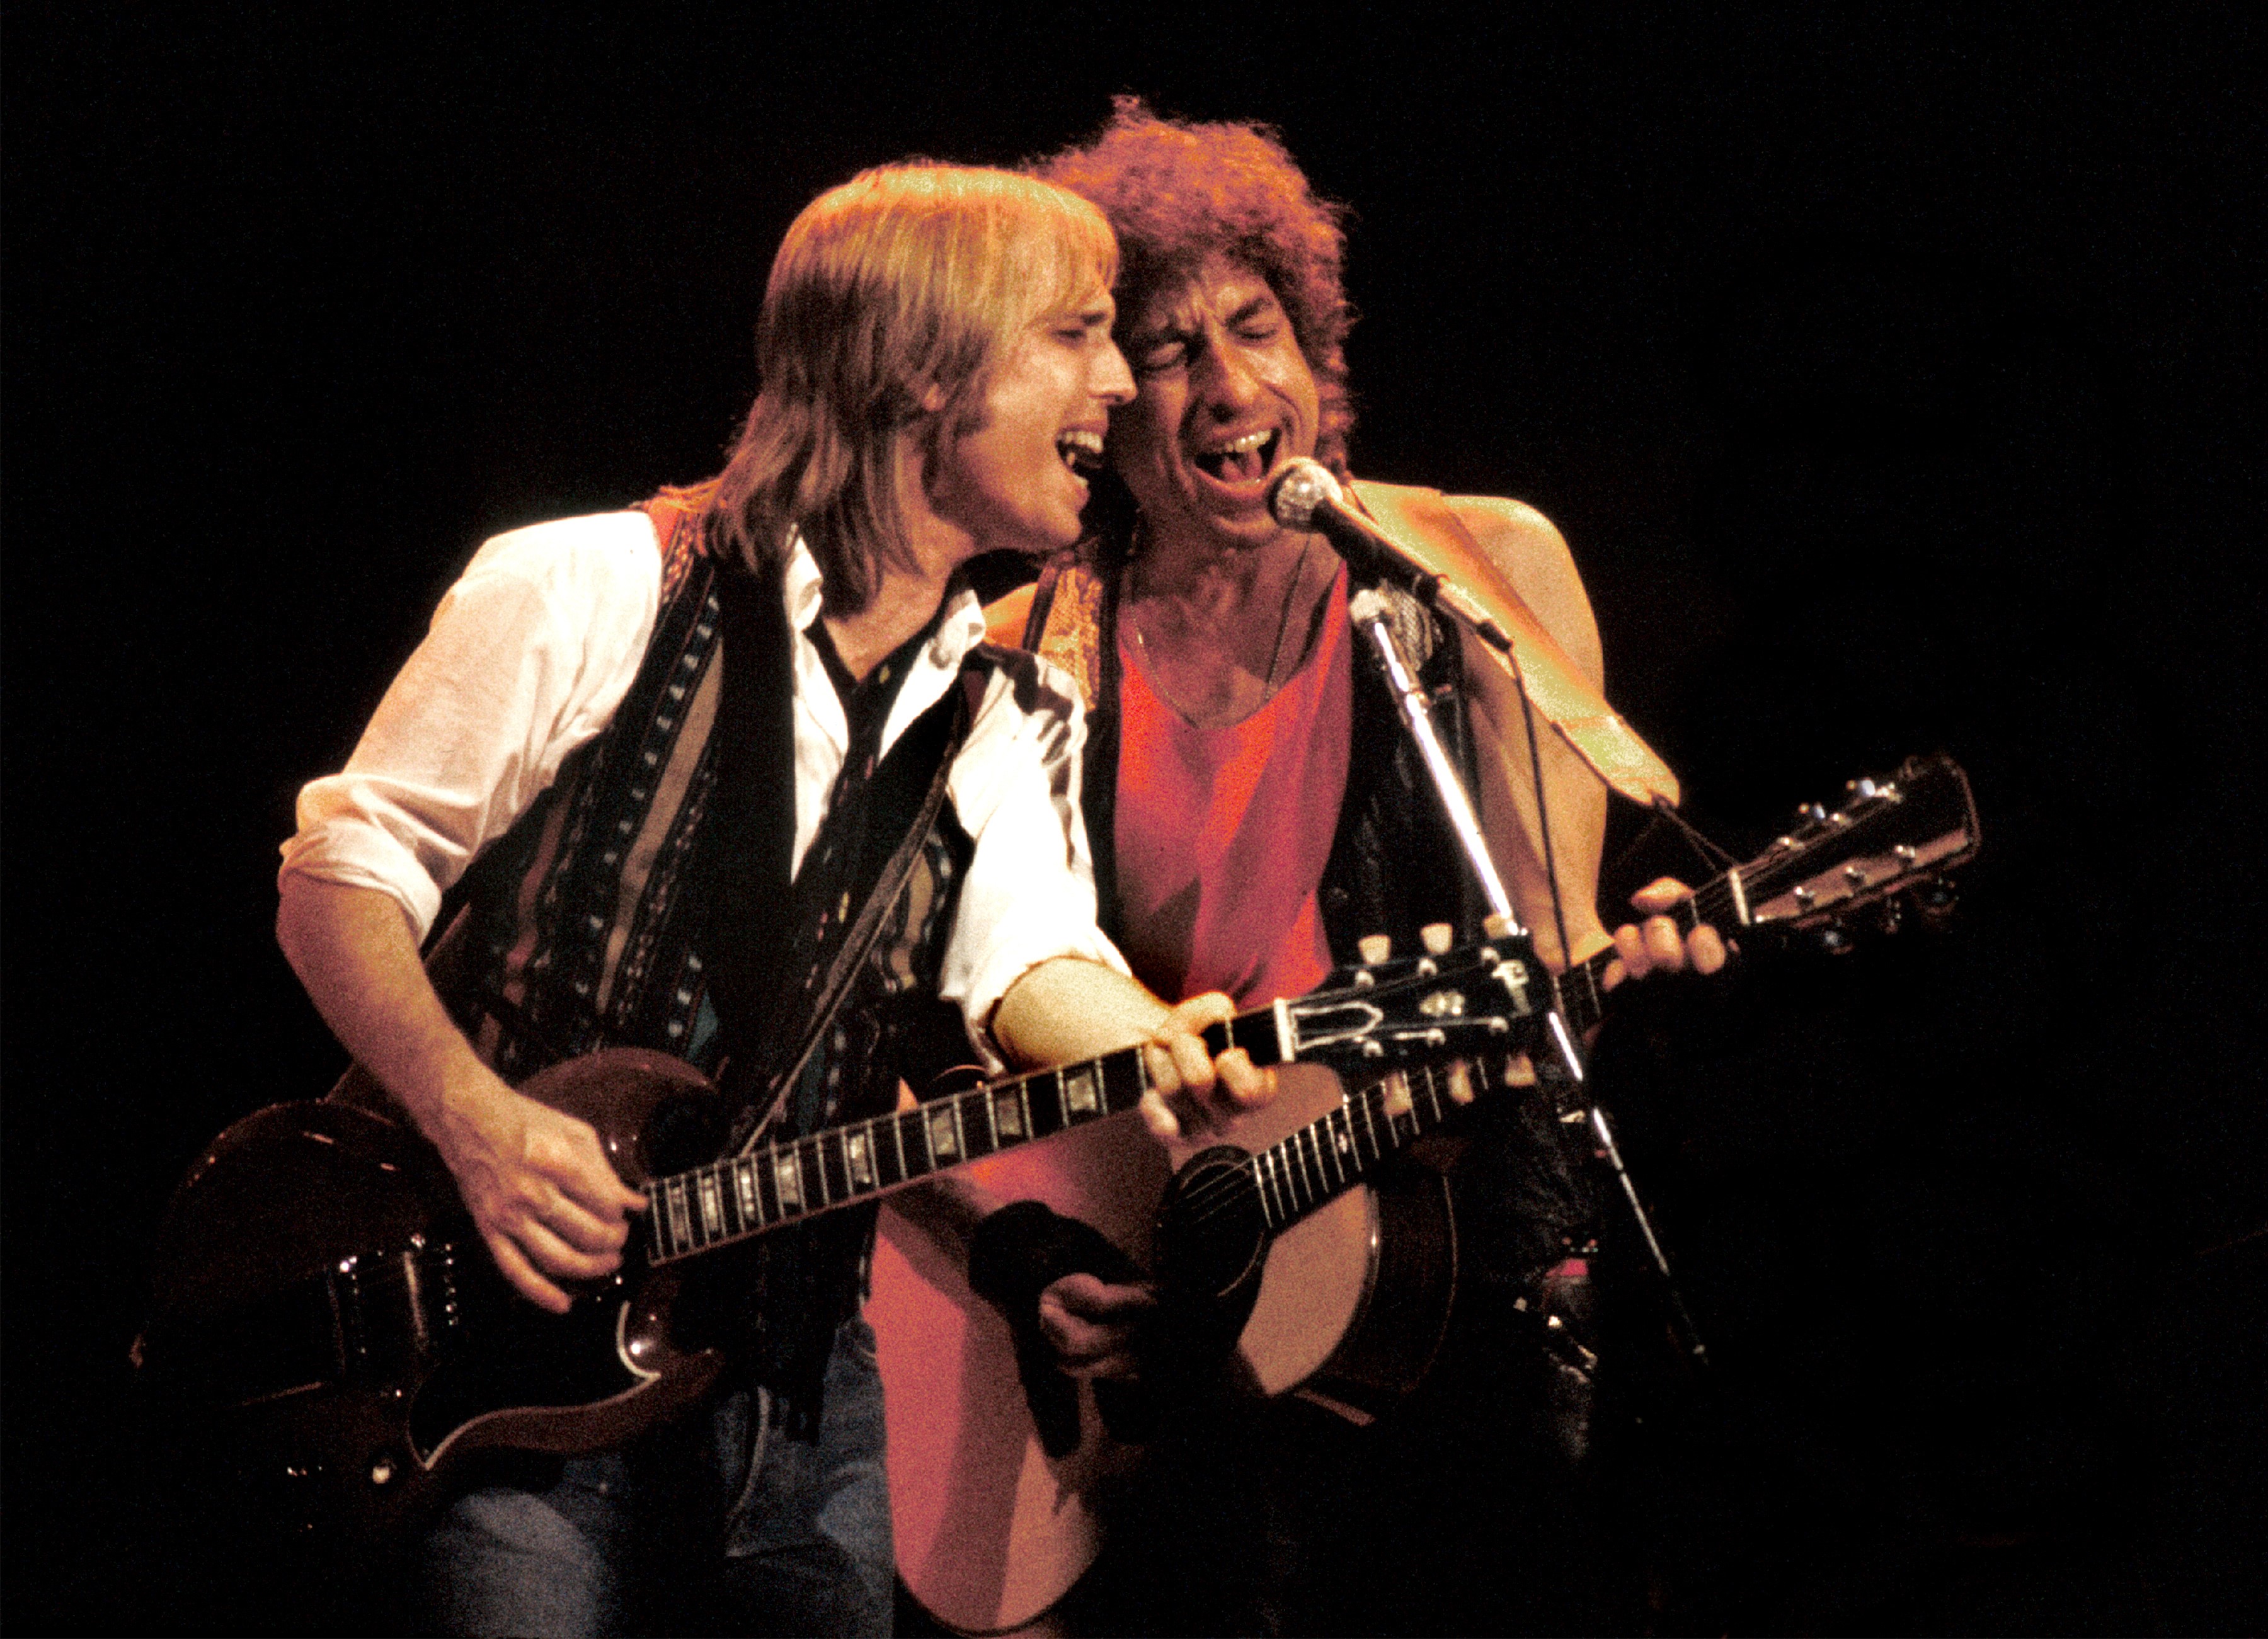 Tom Petty and Bob Dylan play guitar together and sing into the same microphone.